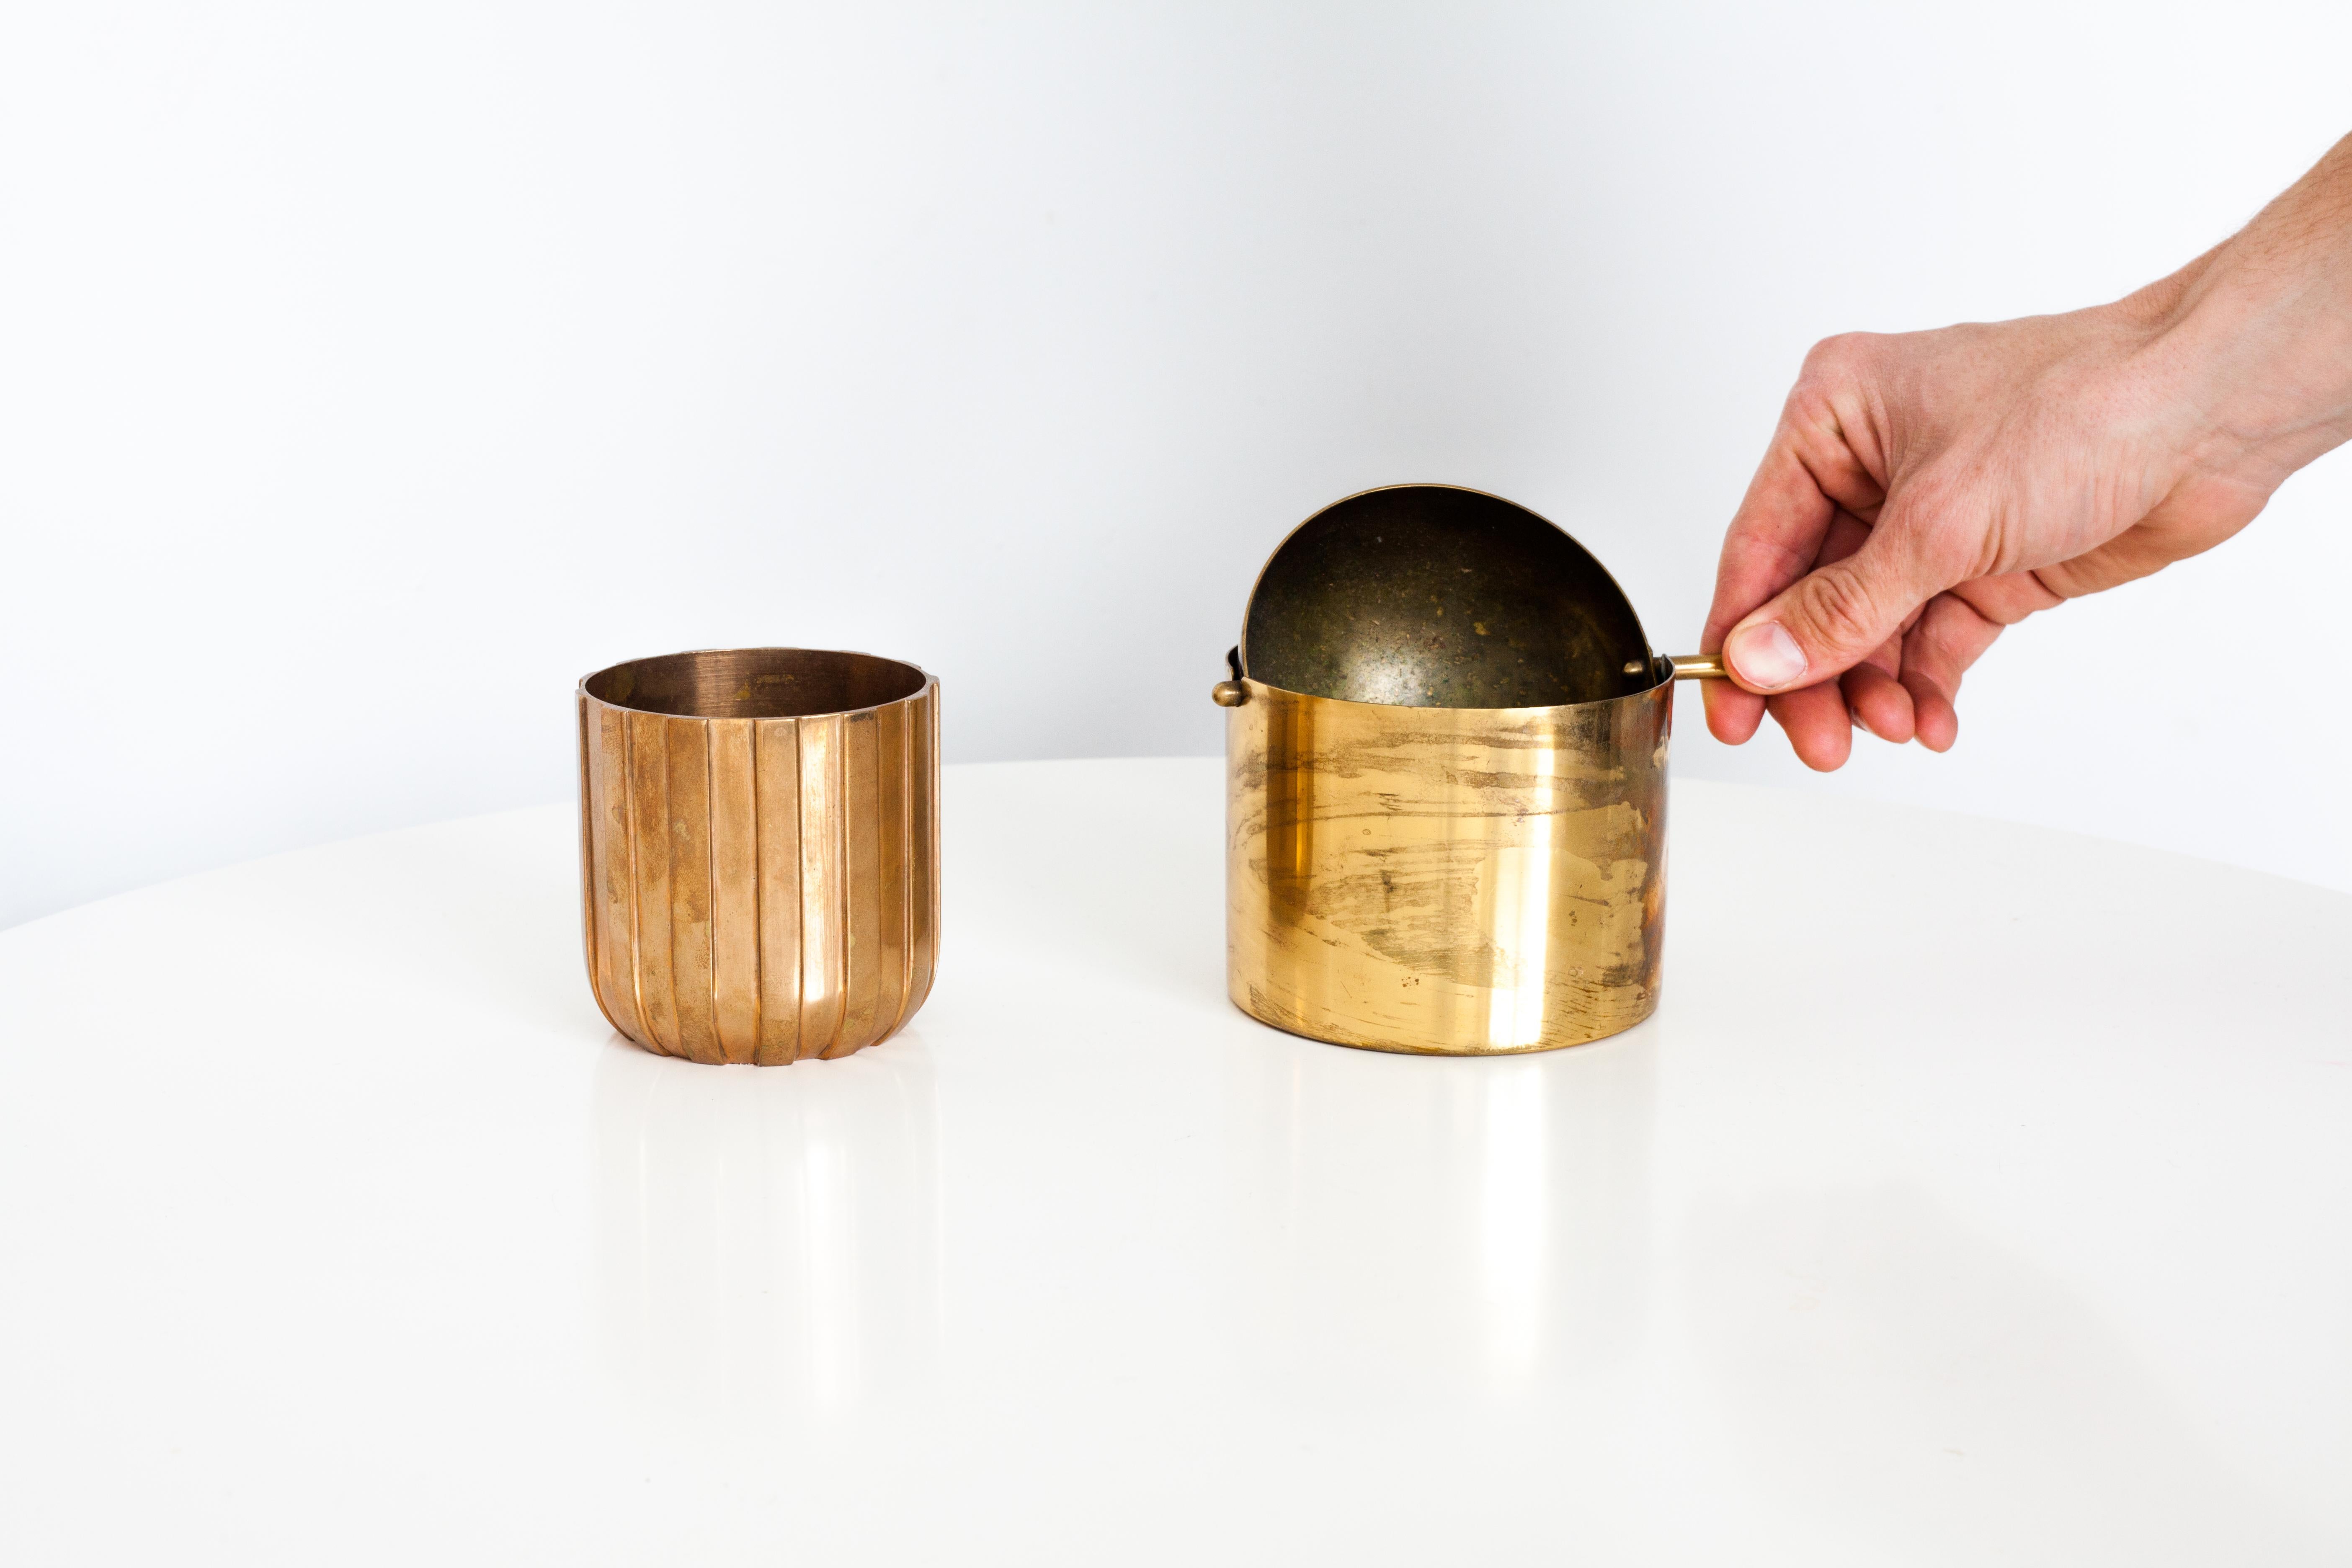 The brass variation of the cylinda-line ashtray by Arne Jacobsen for Stelton is a rare edition. The top half-sphere smoothly rotates to depose of ash in the bucket below. Function and simple but yet an elegant solution made of enduring